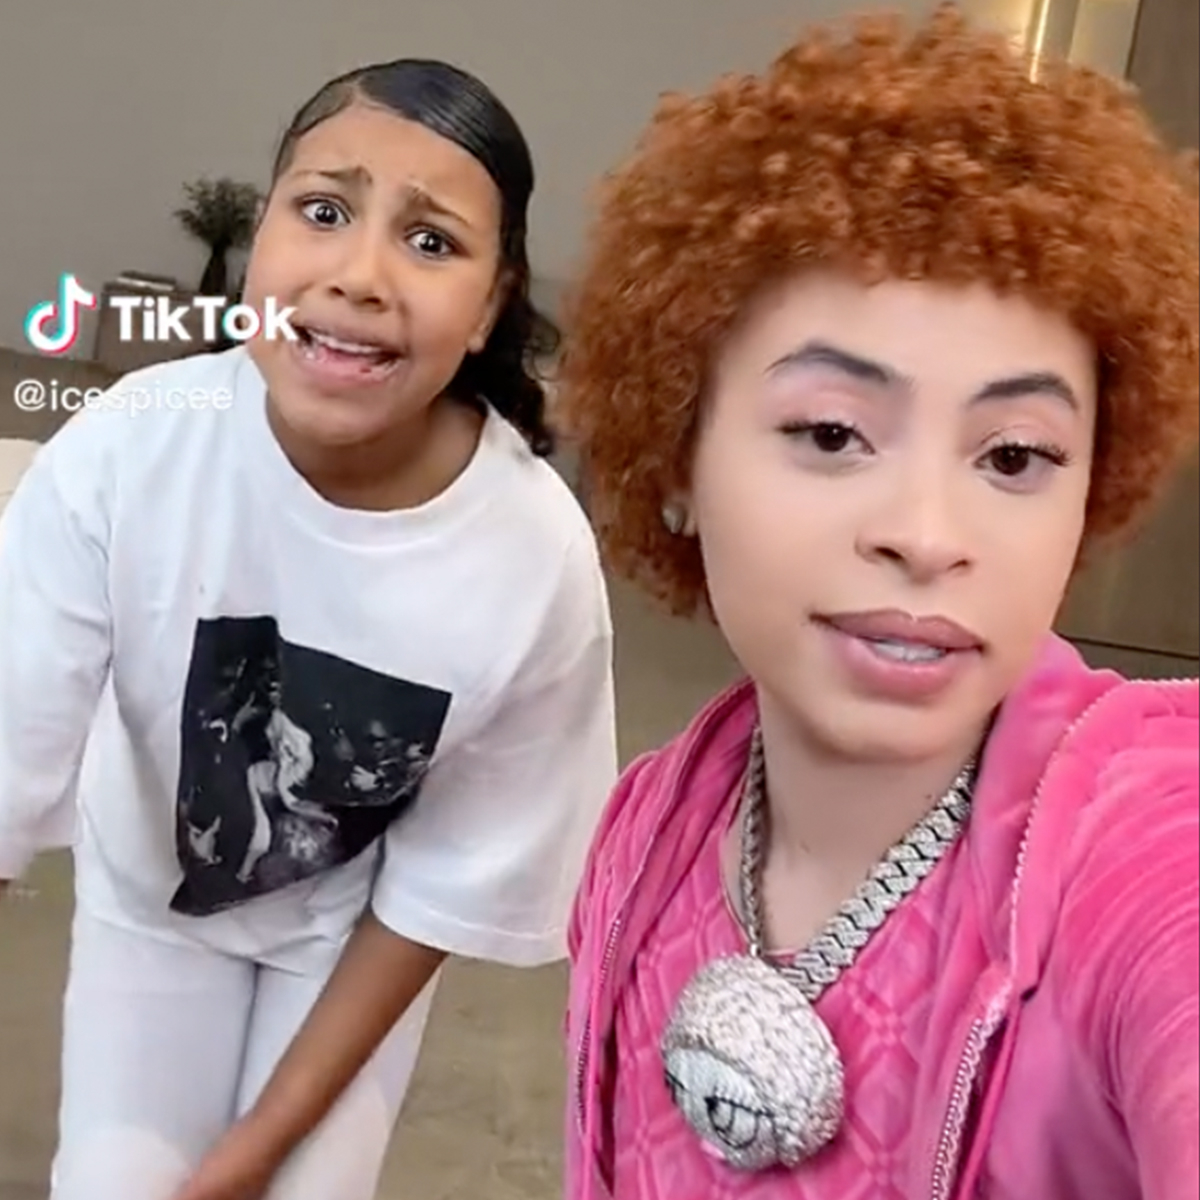 North West and Ice Spice Dance Together and Raid the Fridge in Home TikTok Video – E! Online